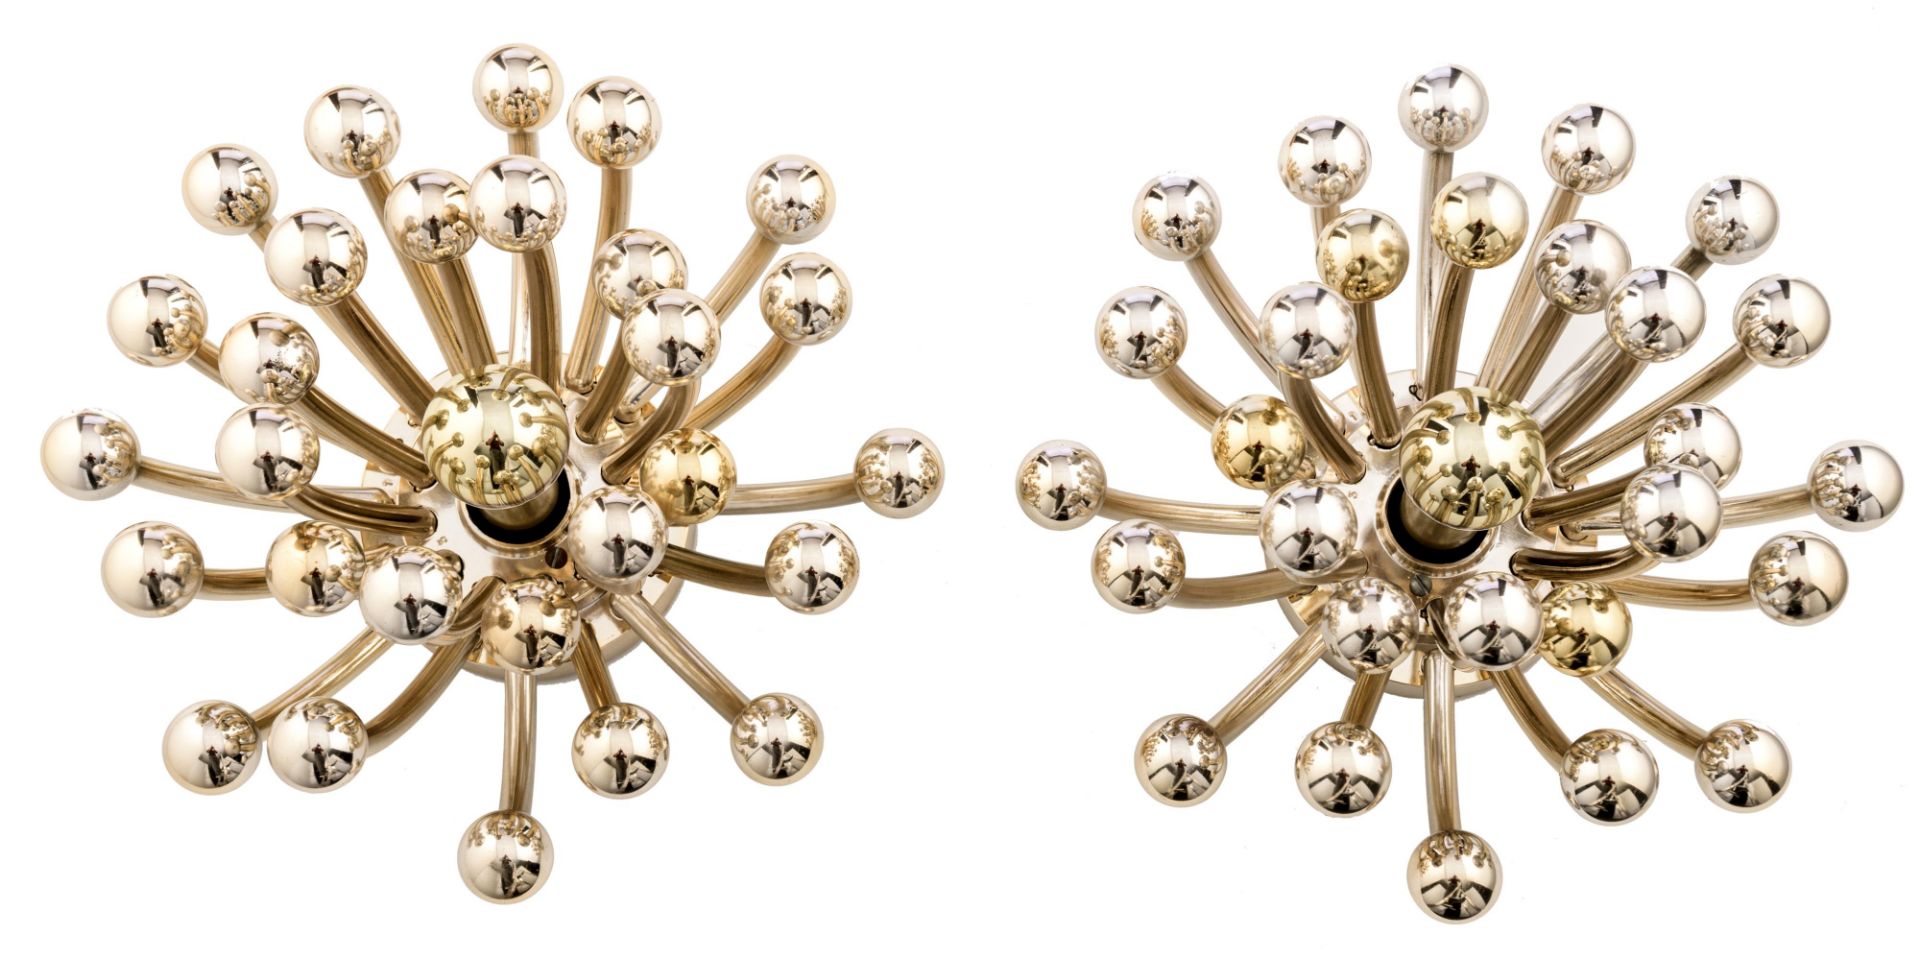 A pair of Pistillino wall or ceiling lights, Studio Tetrarch for Valenti & Co., Italy, chrome plated